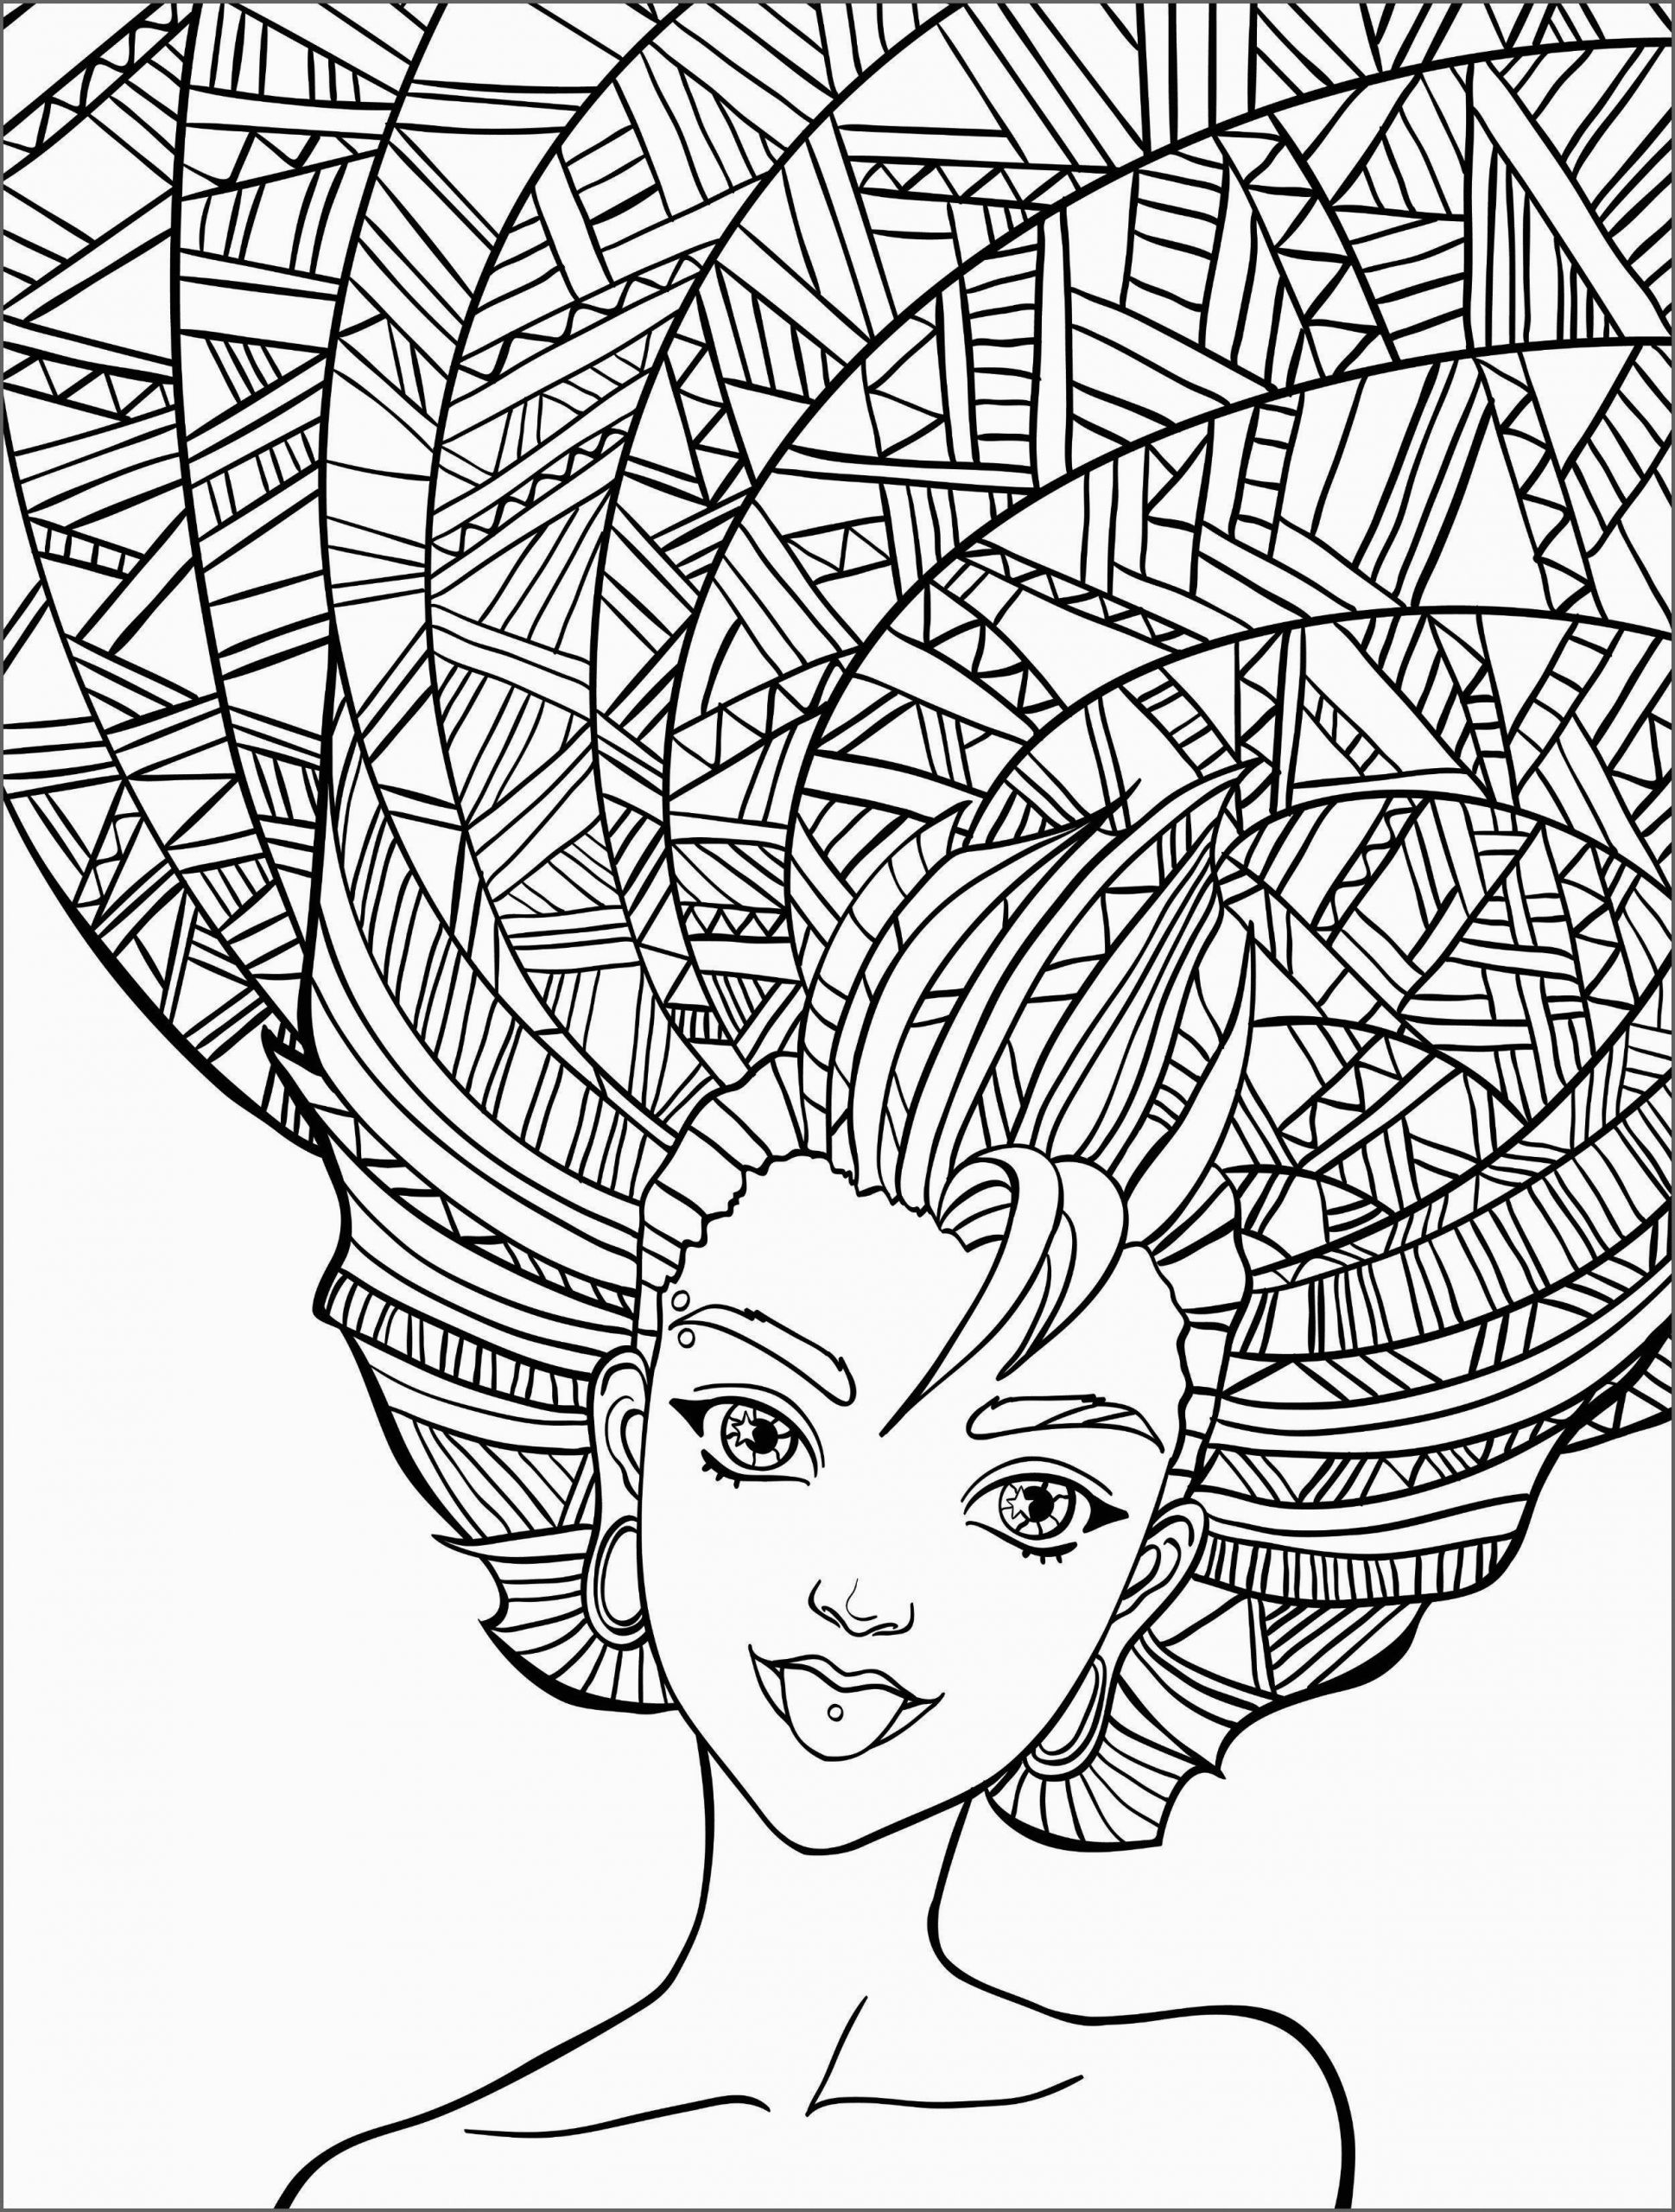 Adult Coloring Pages Free
 Coloring Pages for Adults Best Coloring Pages For Kids